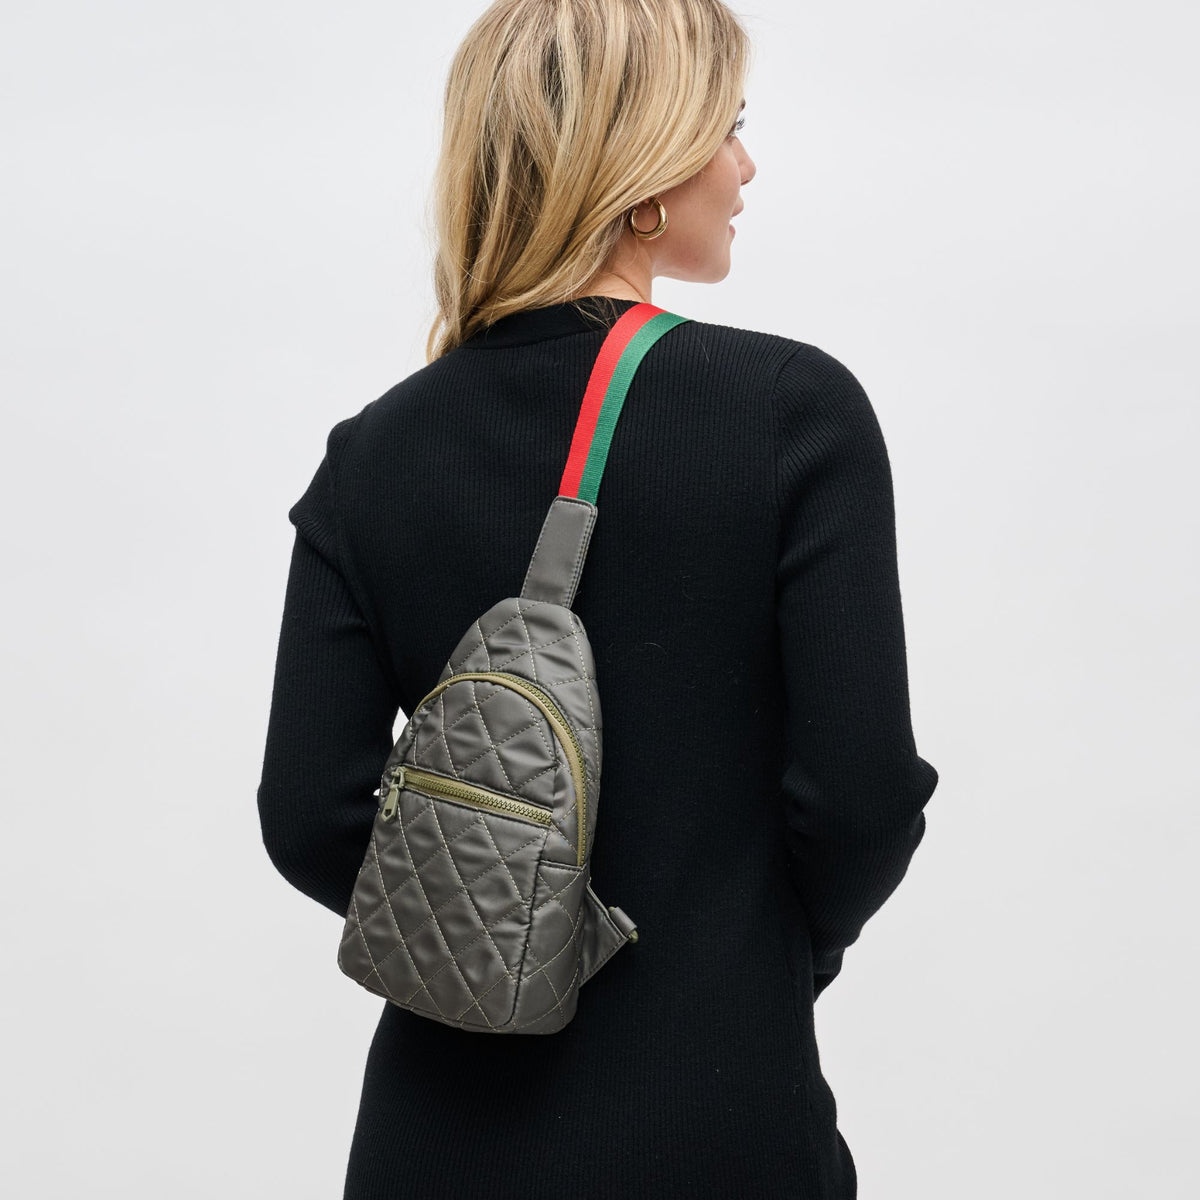 Woman wearing Olive Sol and Selene Motivator Sling Backpack 841764107921 View 2 | Olive